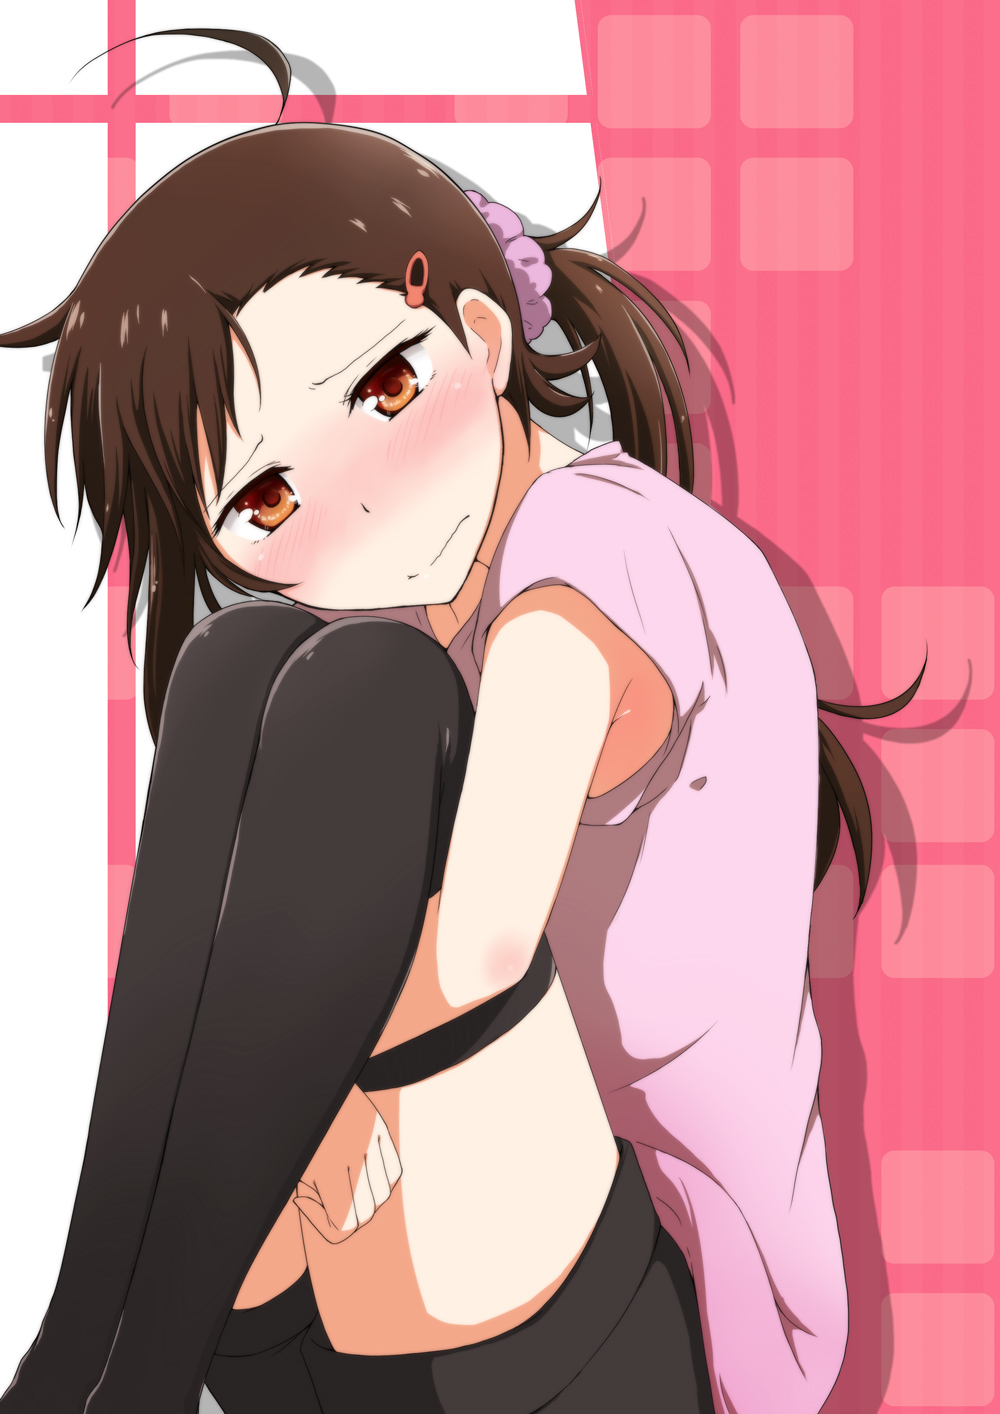 Nisekoi, Onodera, Haru, ahoge, blush, brown, eyes, hair, hairpins, long, shorts, side, tail, thigh, highs, , , anime, picture, , |, , , pictures